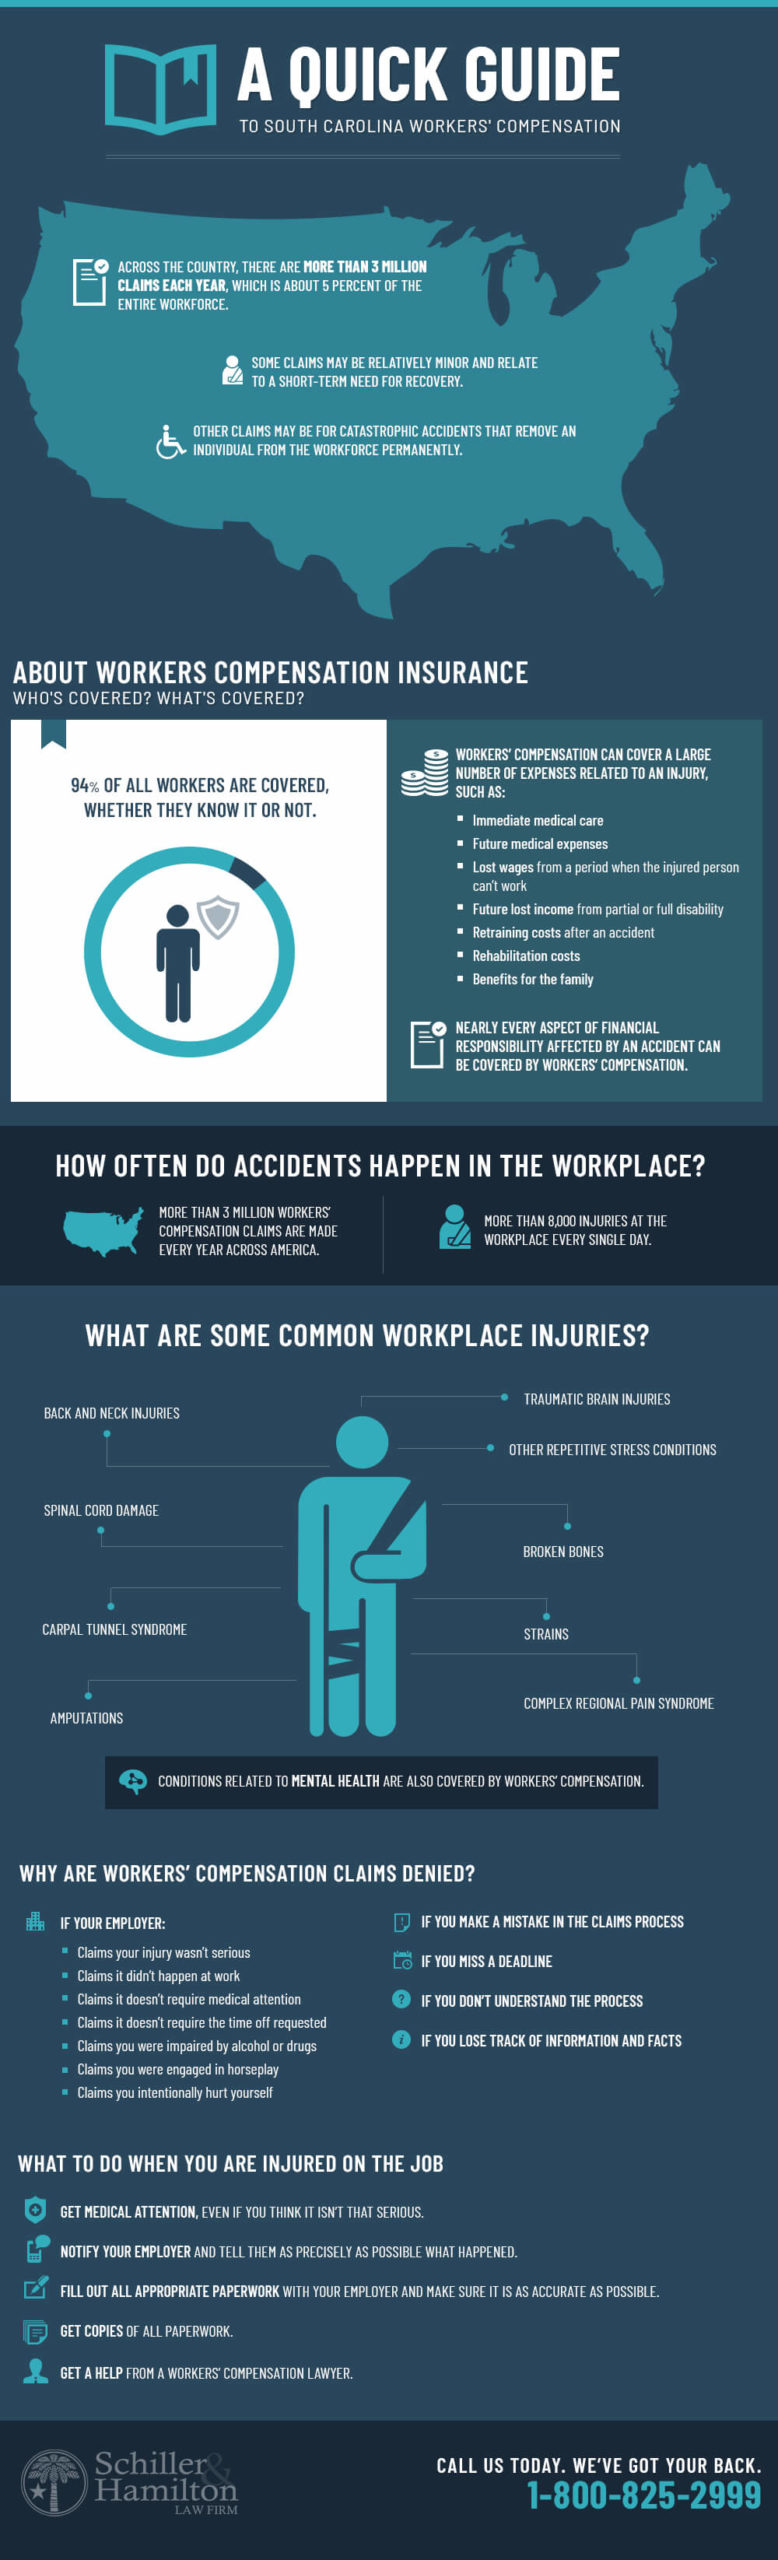 Reasons-Why-Workers-Compensation-Claims-Denied